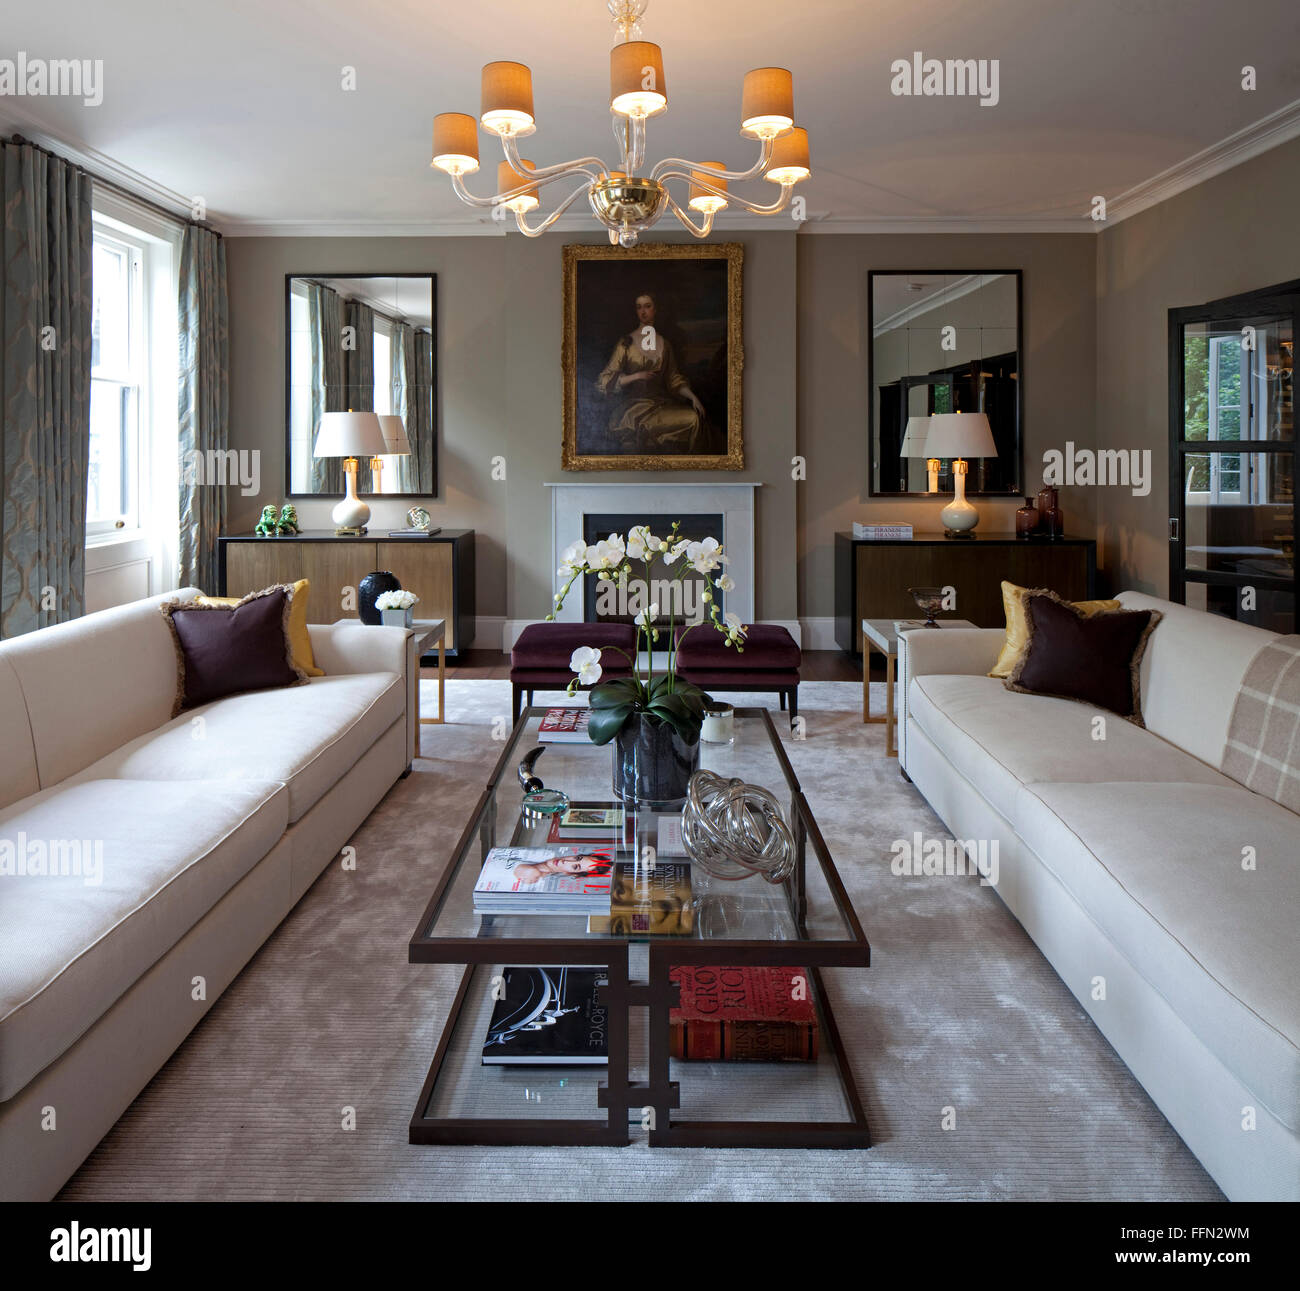 Knightsbridge Apartment, London. A sitting room, with large sofas and comfortable chairs. Stock Photo